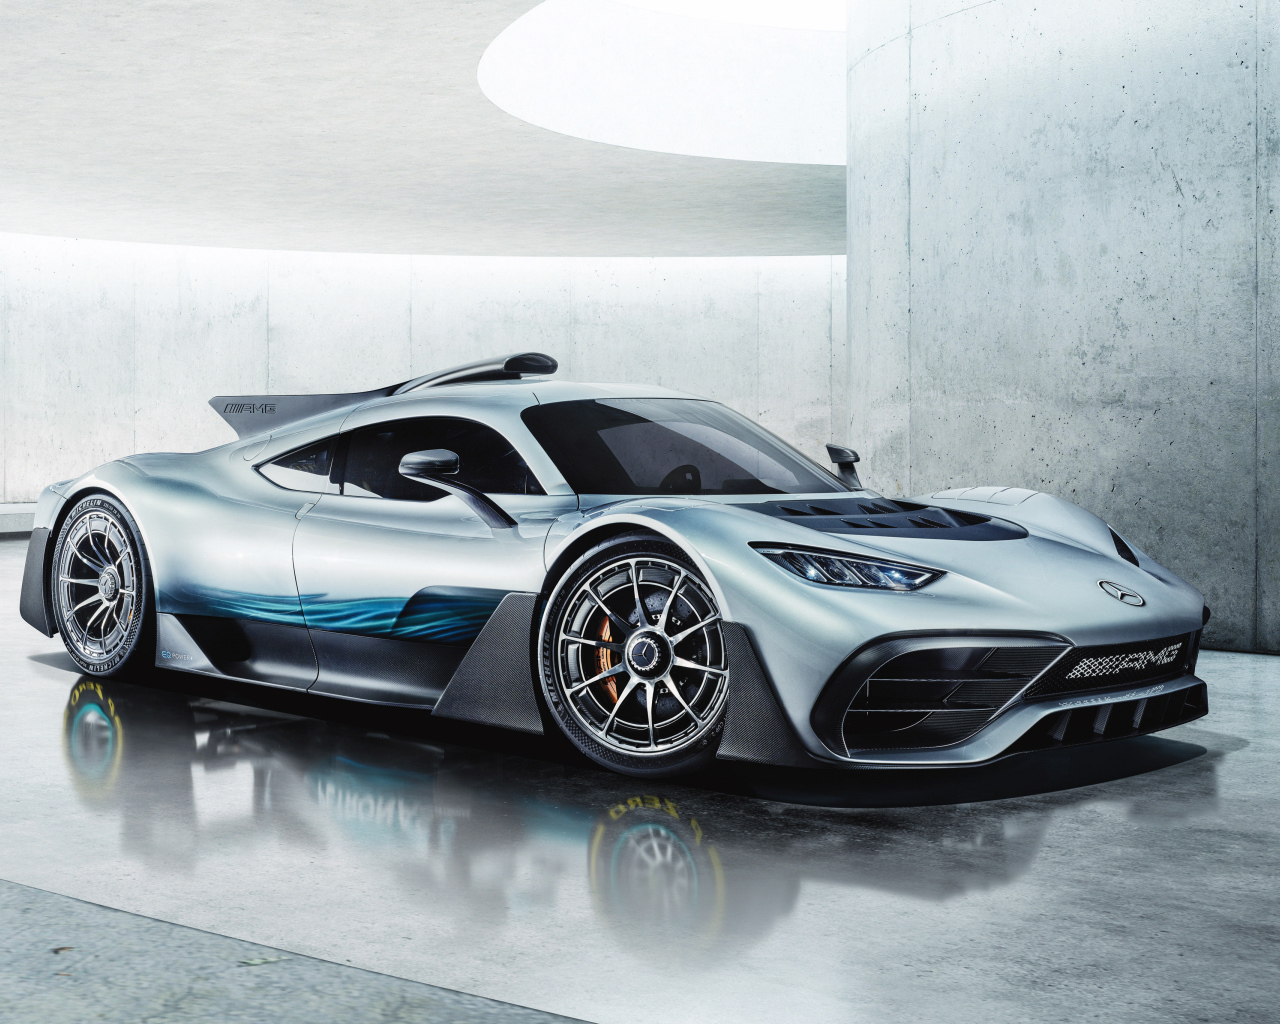 Silver sports car Mercedes Amg Project One 2018